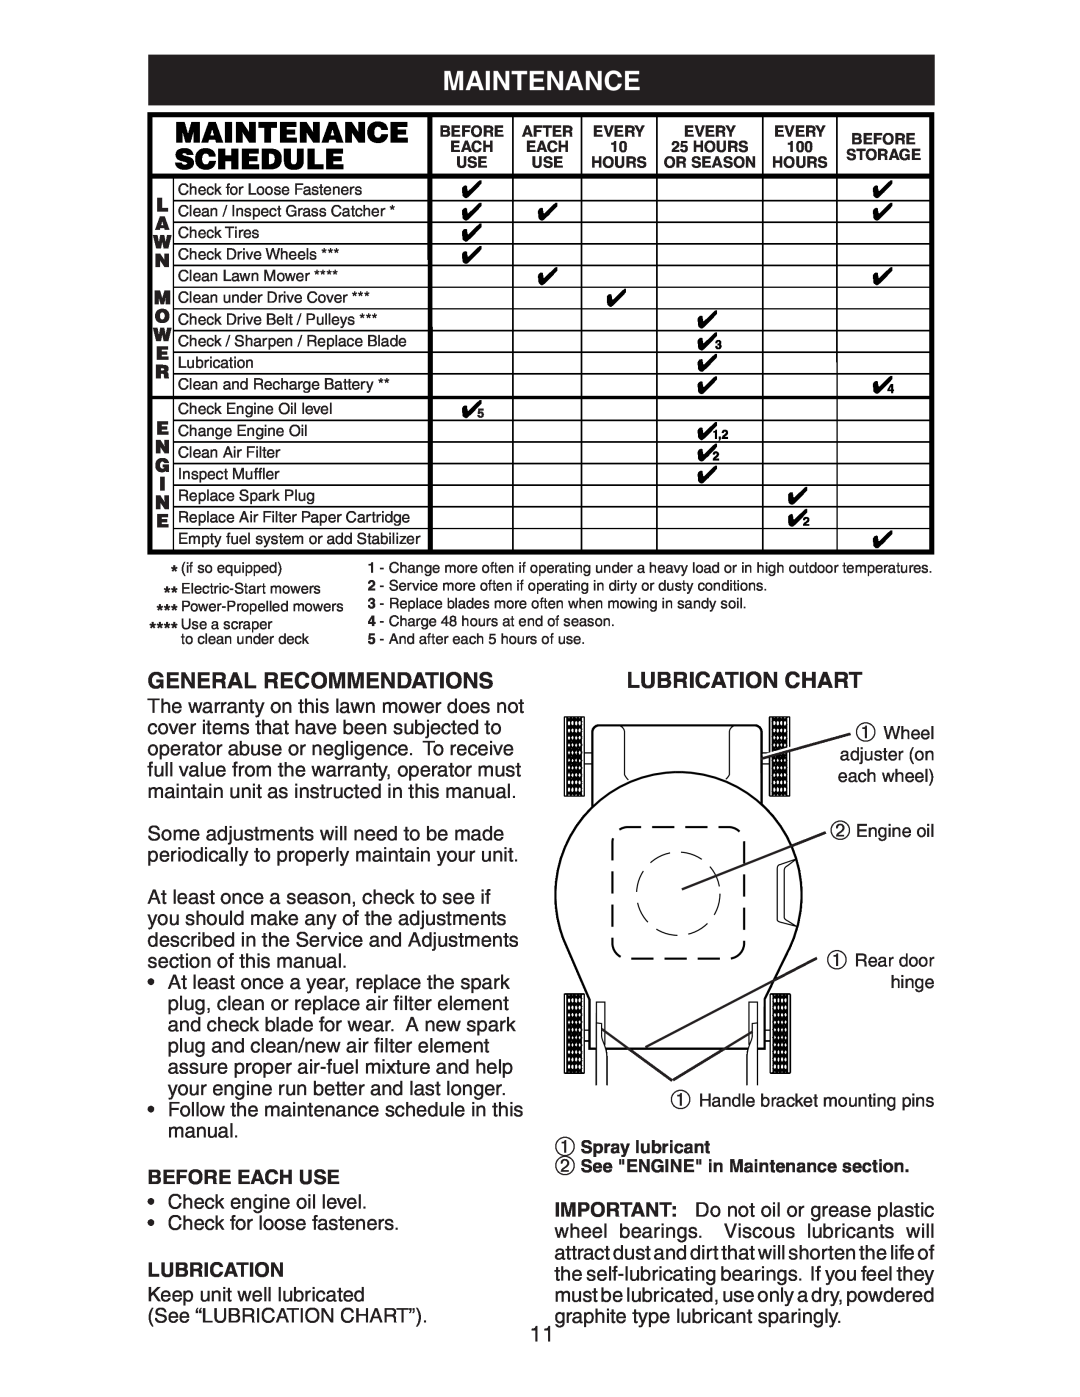 Craftsman 917.38885 owner manual Maintenance, General Recommendations, Lubrication Chart 